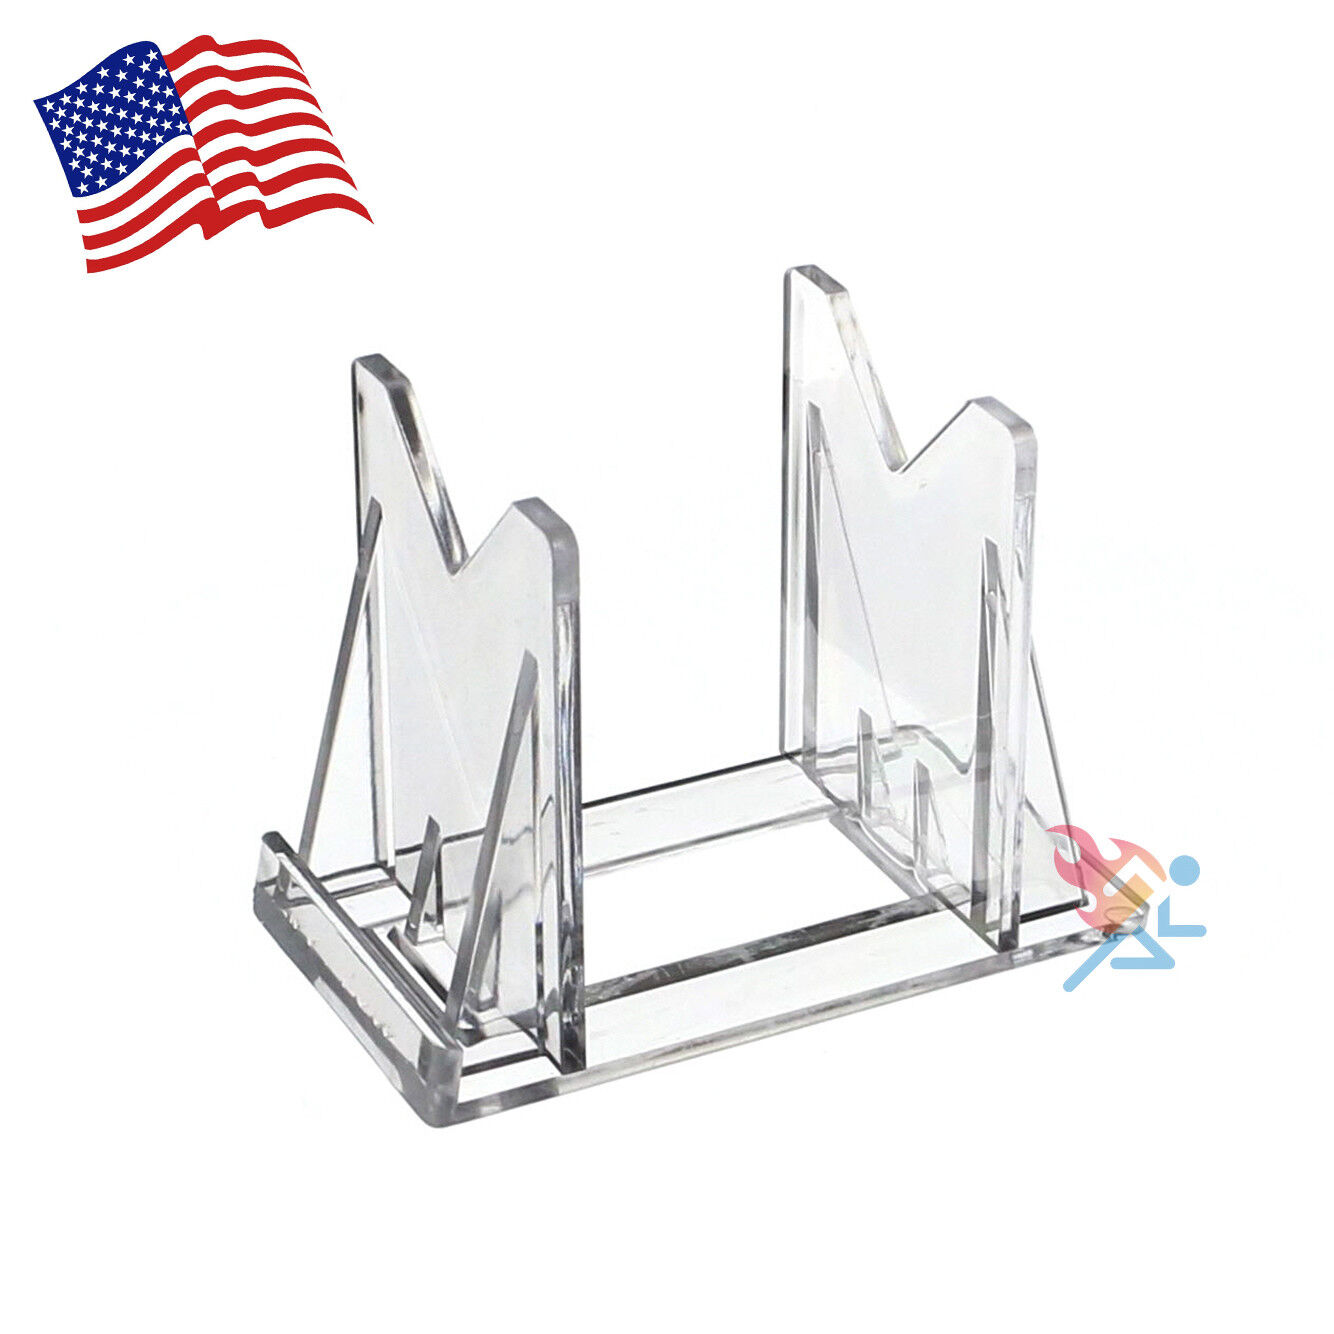 Fishing Lure Display Stand Easels 10 Pack OnFireGuy 010-11099